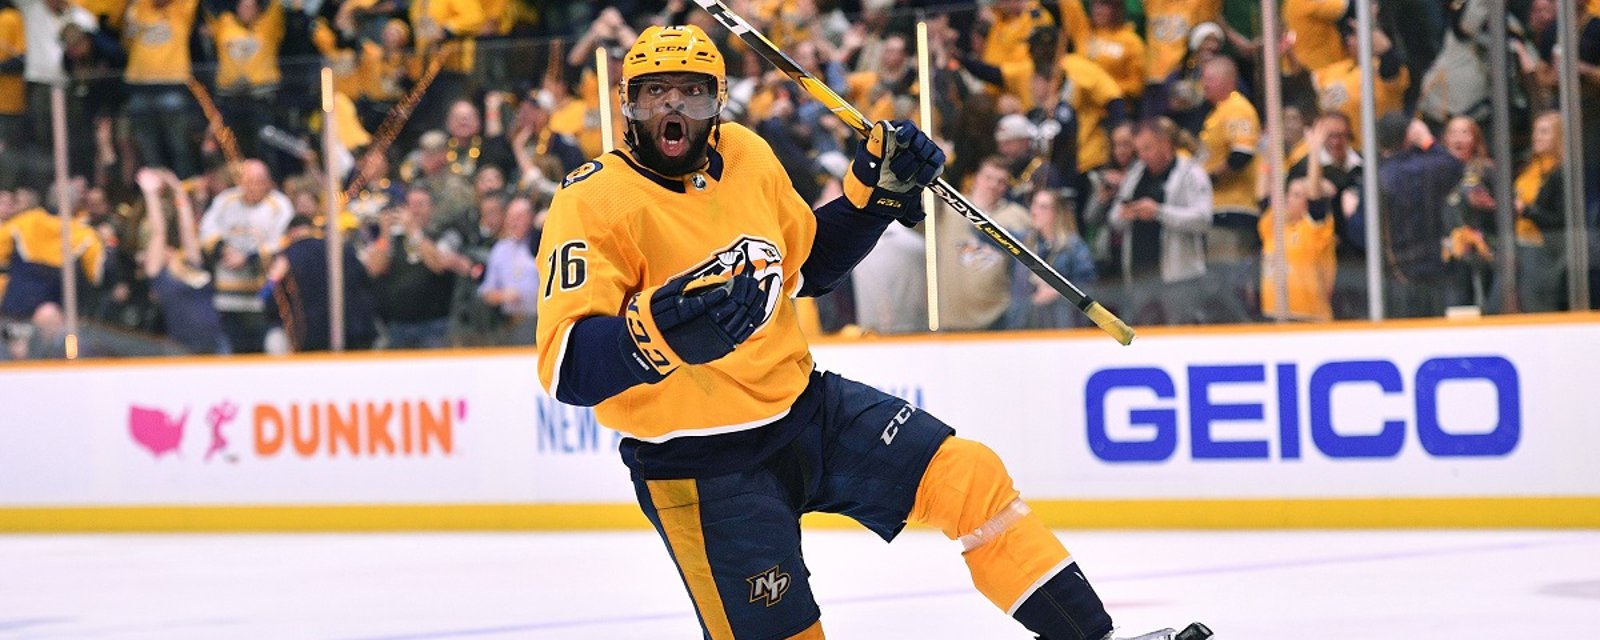 Insider proposes Flyers trade 2 players to Predators for P.K. Subban.